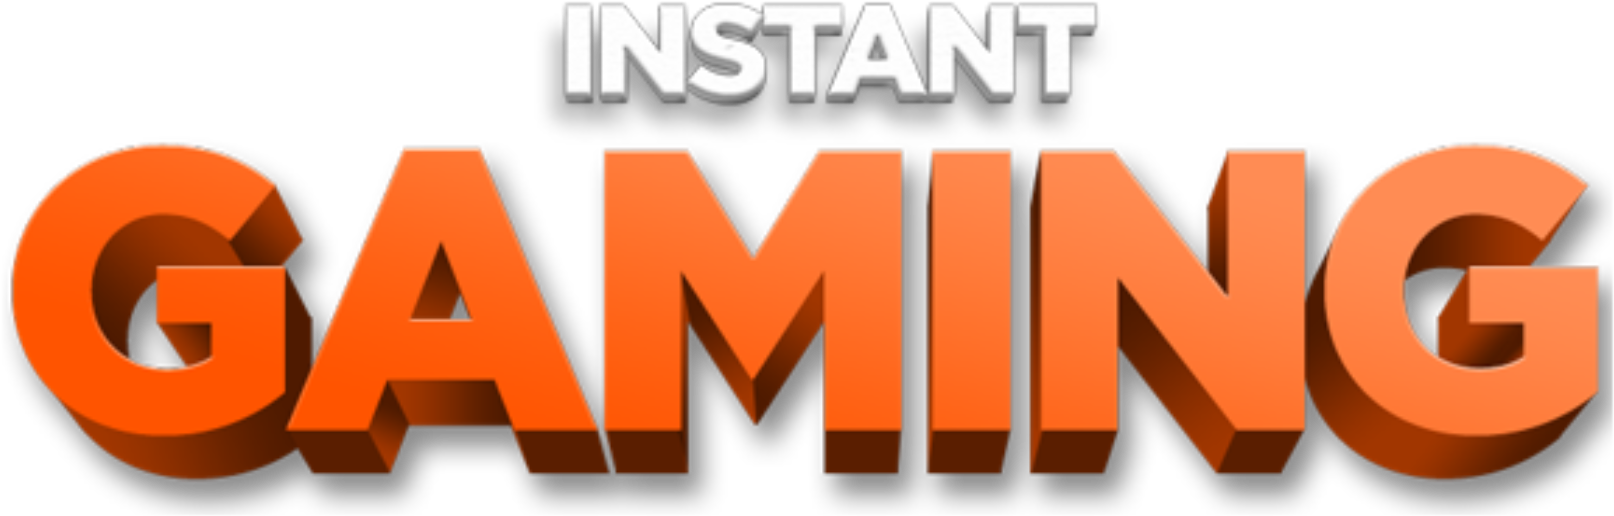 Instant gaming logo - Download Free Png Images